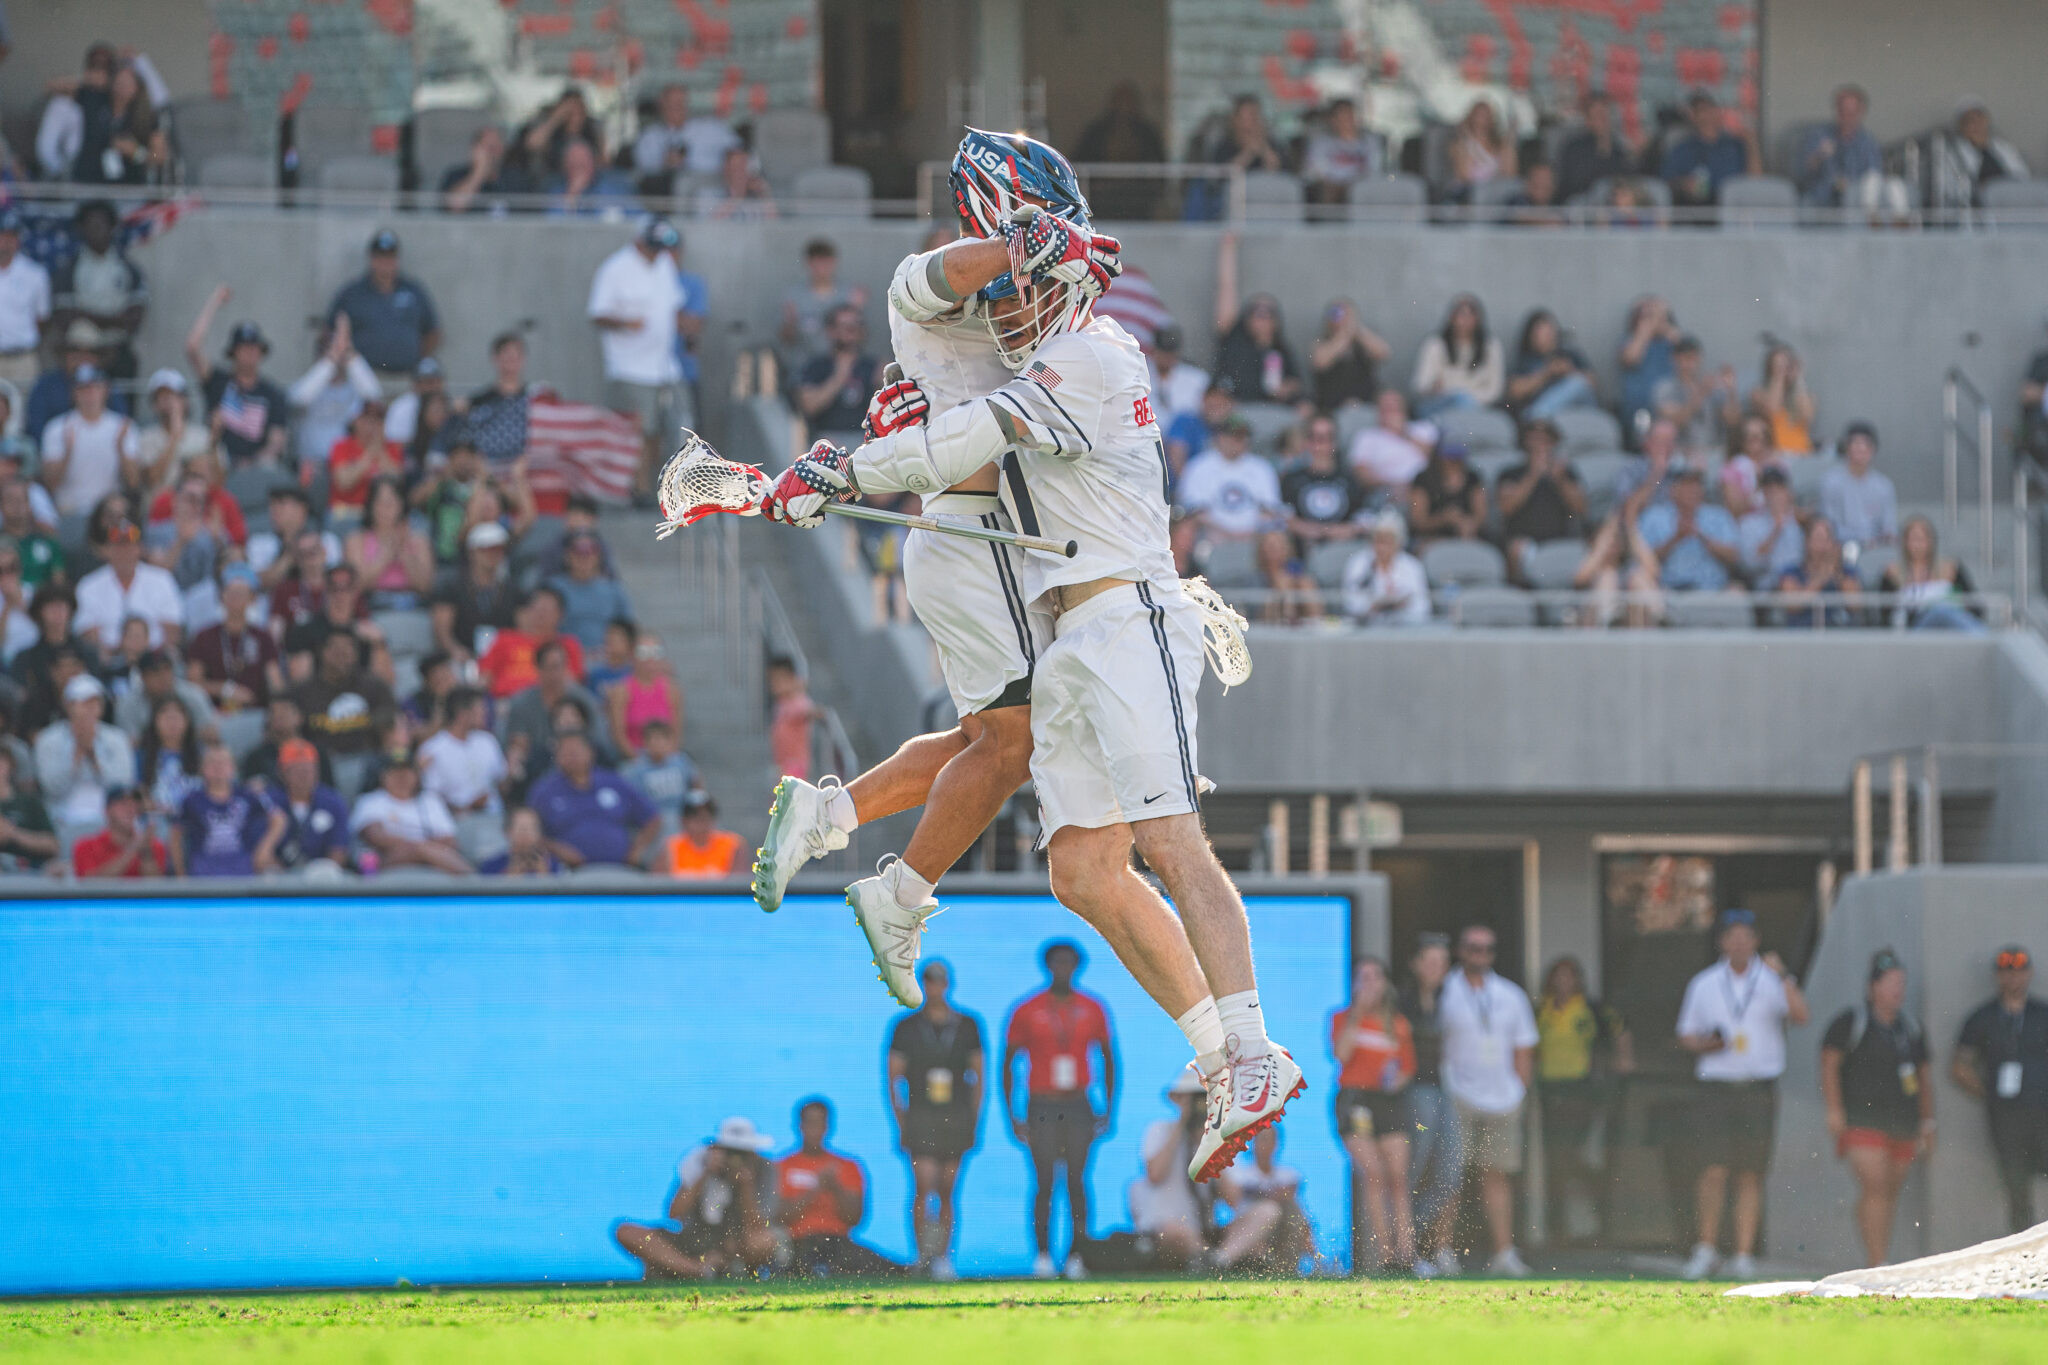 USA crowned World Lacrosse Men's Championship winners for 11th time